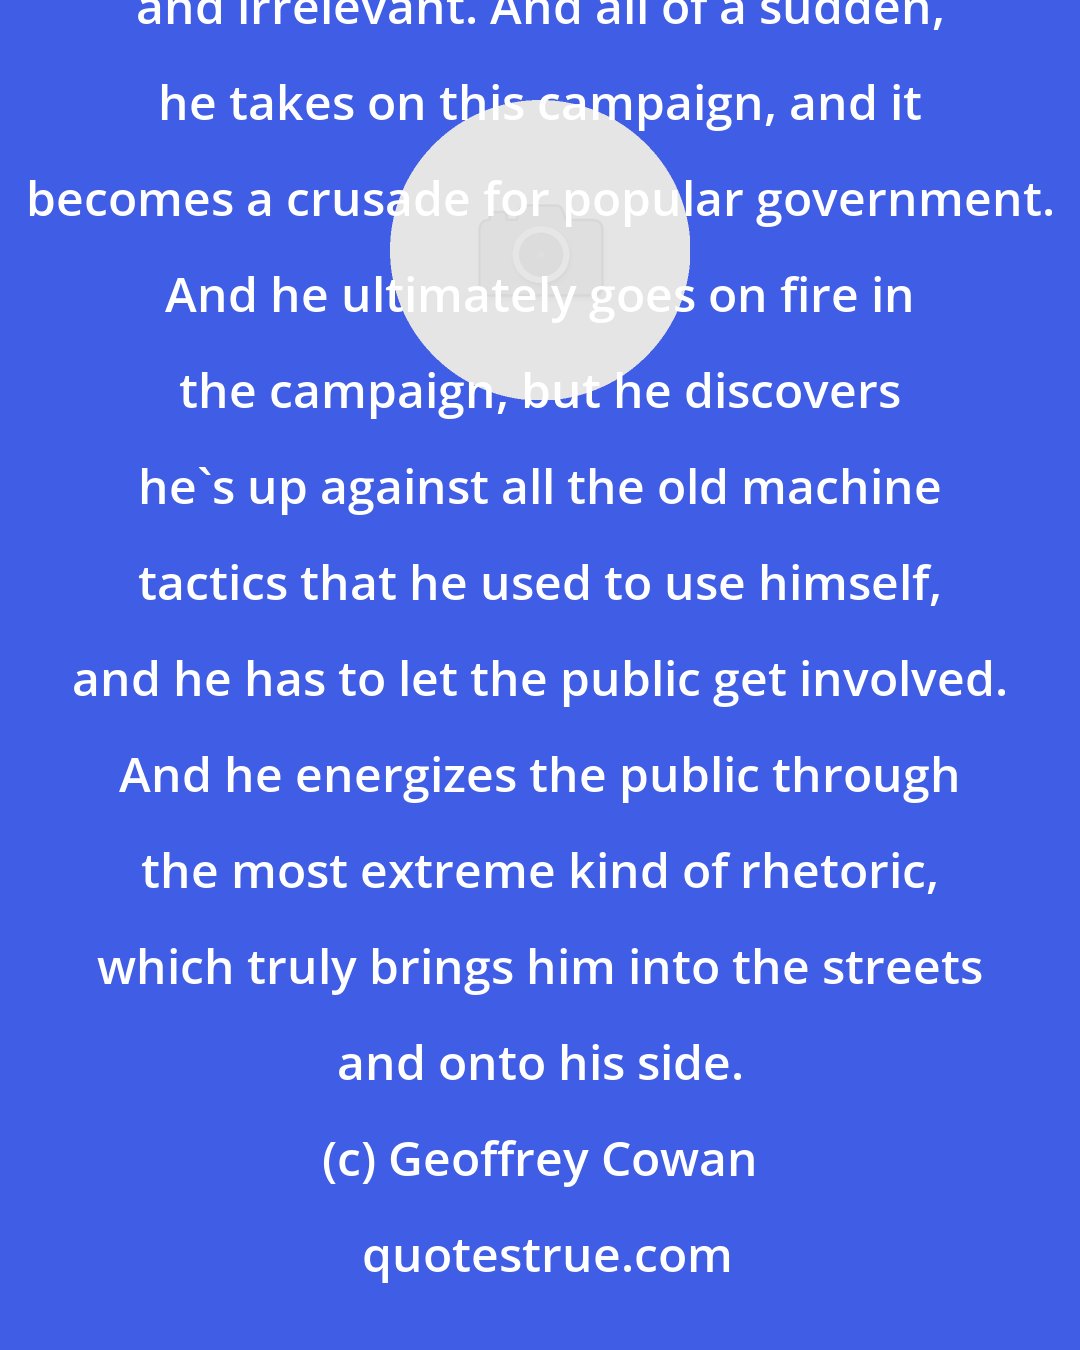 Geoffrey Cowan: To picture Roosevelt as a man at this time in his life - he felt he was old. He was 53 years old, feeling lonely and irrelevant. And all of a sudden, he takes on this campaign, and it becomes a crusade for popular government. And he ultimately goes on fire in the campaign, but he discovers he's up against all the old machine tactics that he used to use himself, and he has to let the public get involved. And he energizes the public through the most extreme kind of rhetoric, which truly brings him into the streets and onto his side.